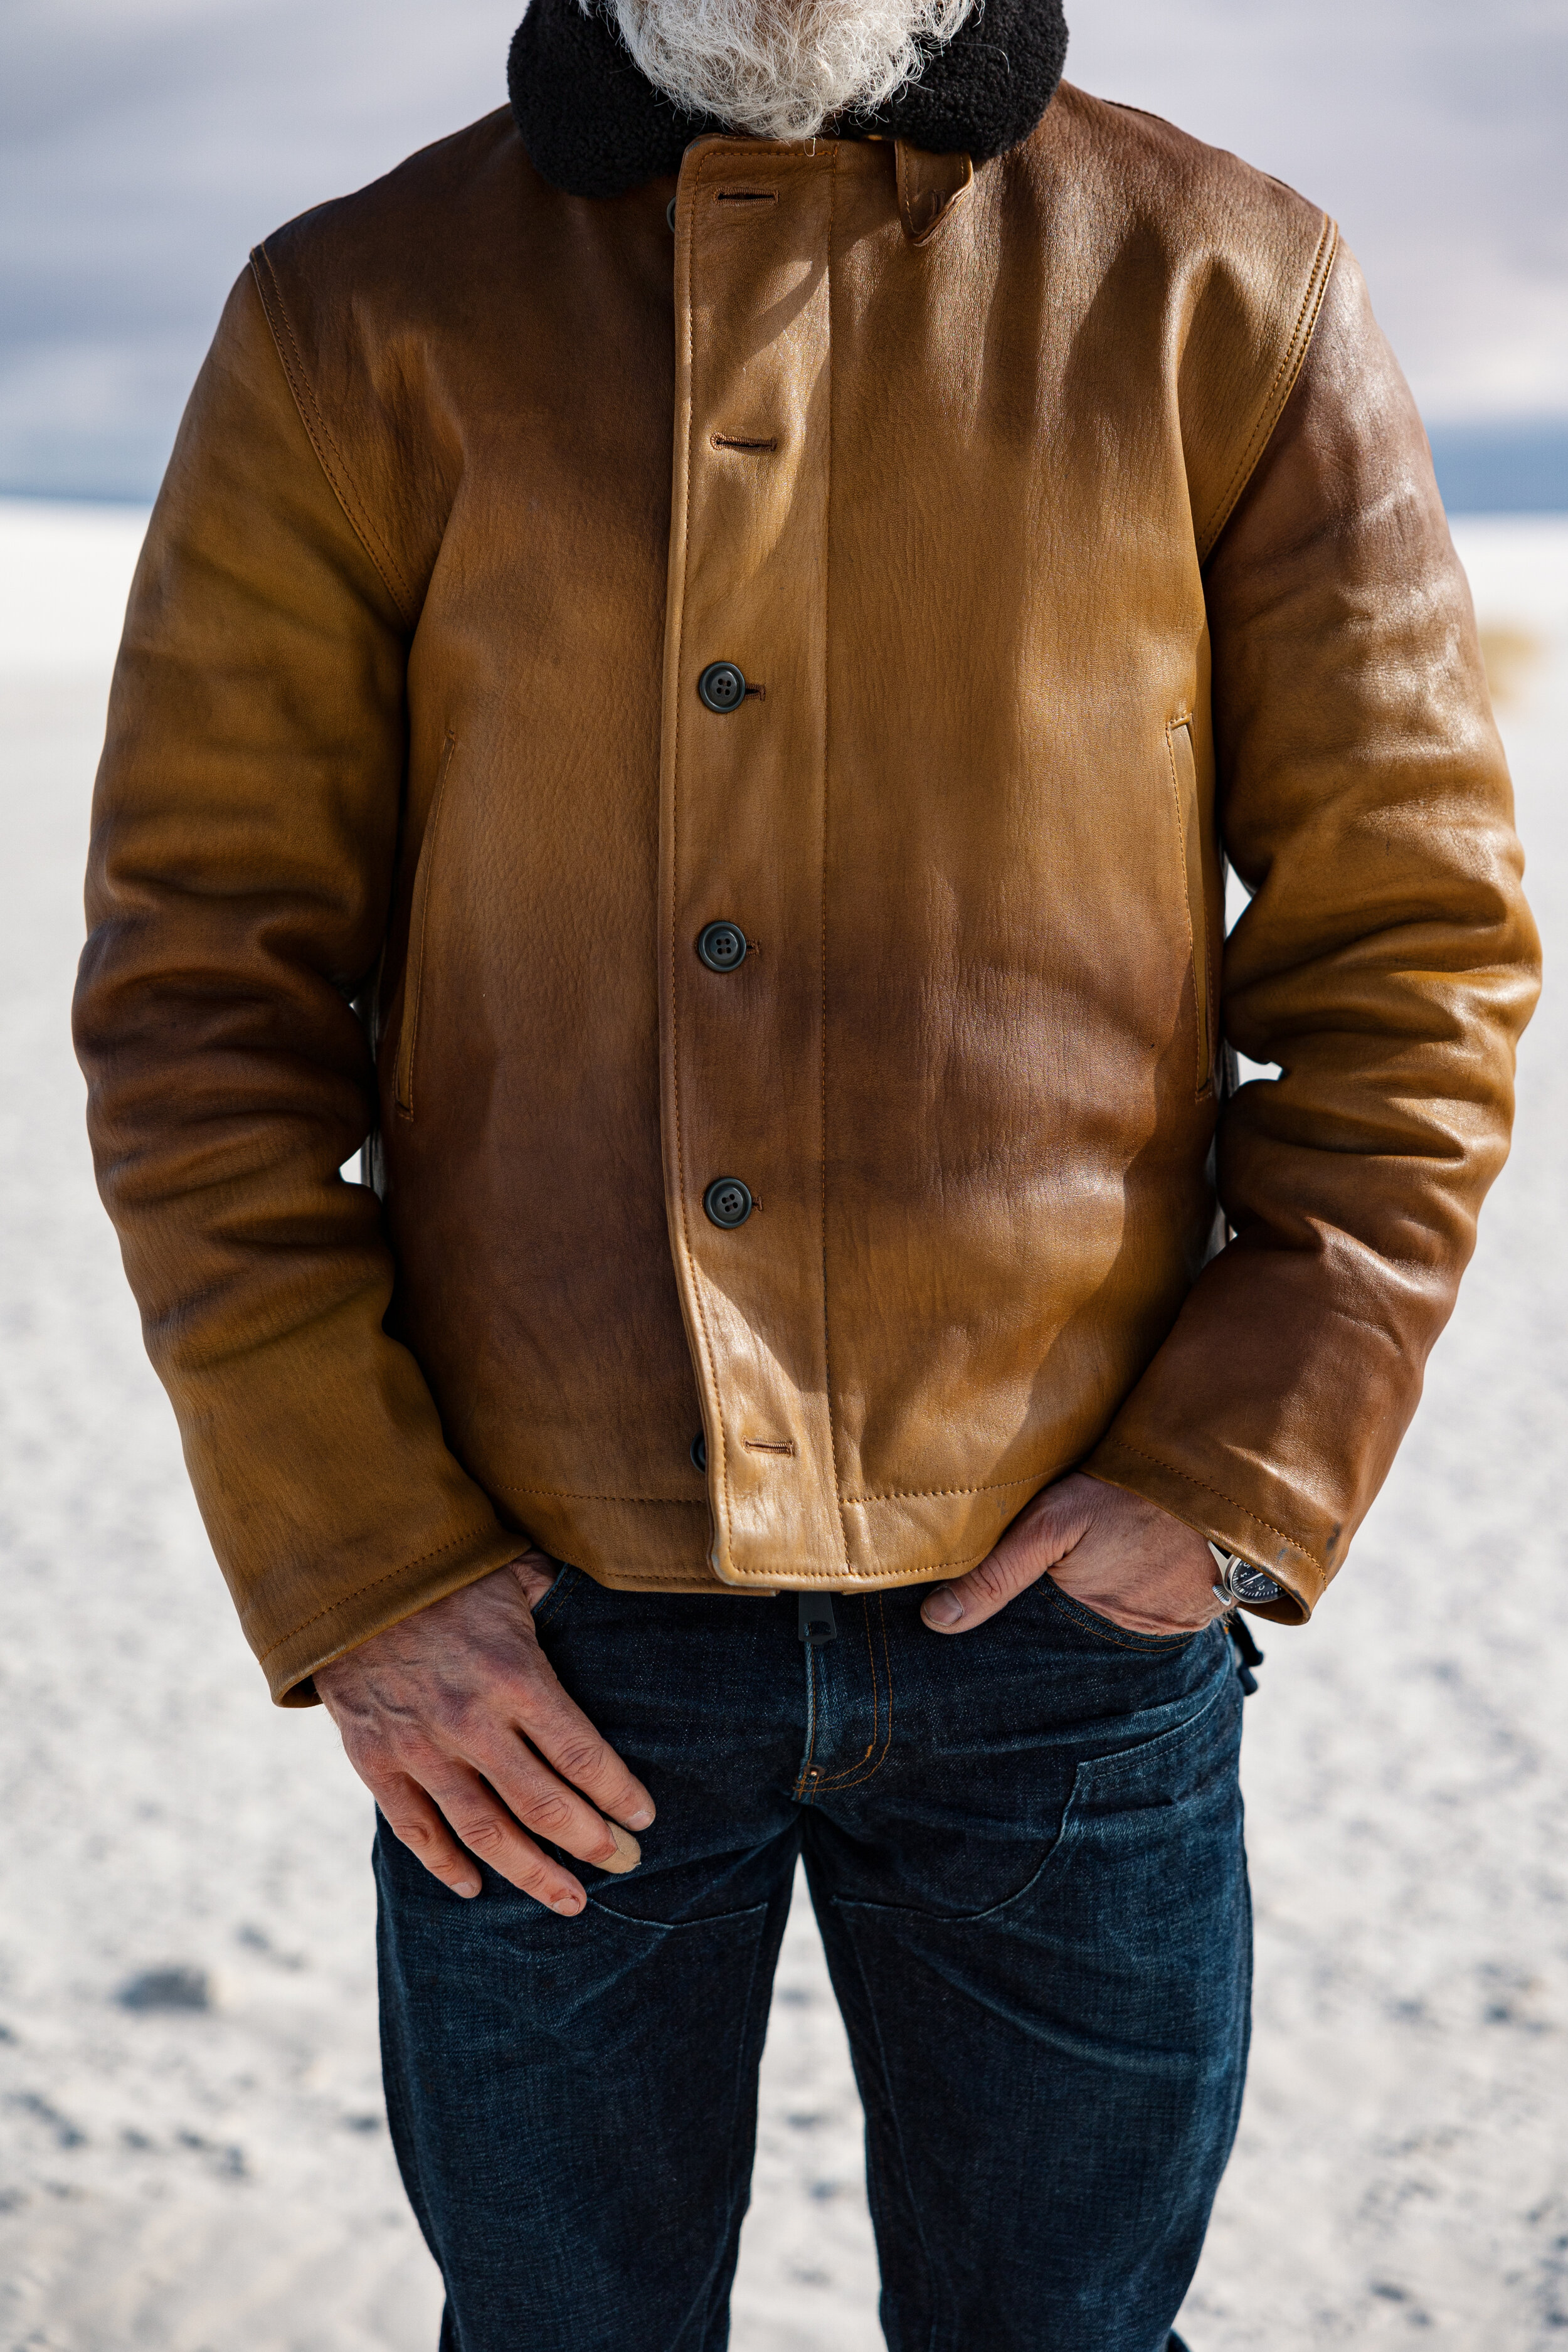 Natural/Army Horsehide N1 Deck Jacket (Made To Order). — Black Bear Brand